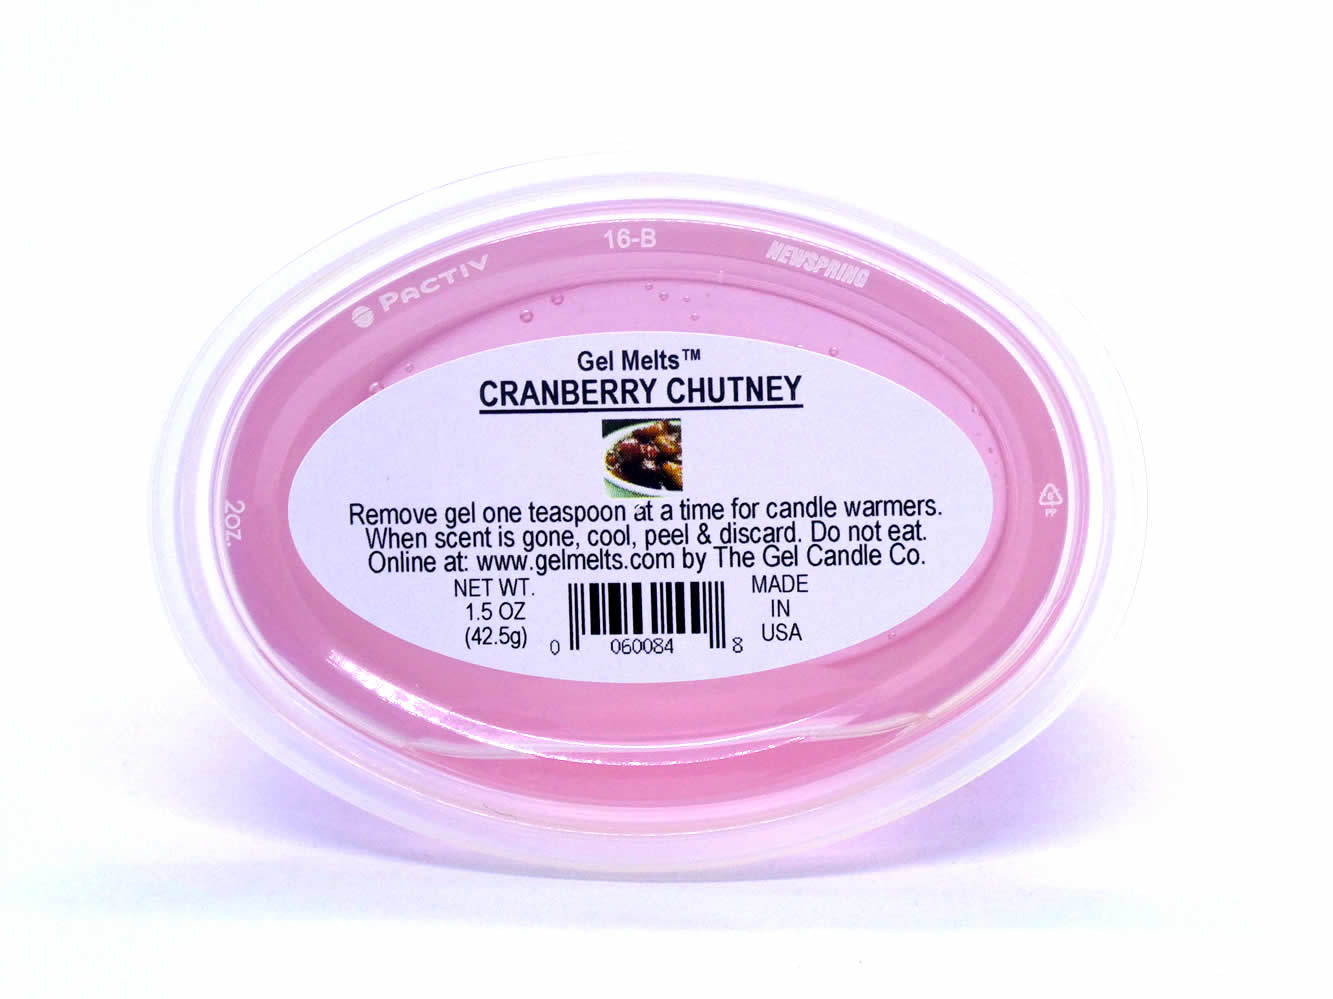 Cranberry Chutney scented Gel Melts™ Gel Wax or warmers - 3 pack - Click Image to Close